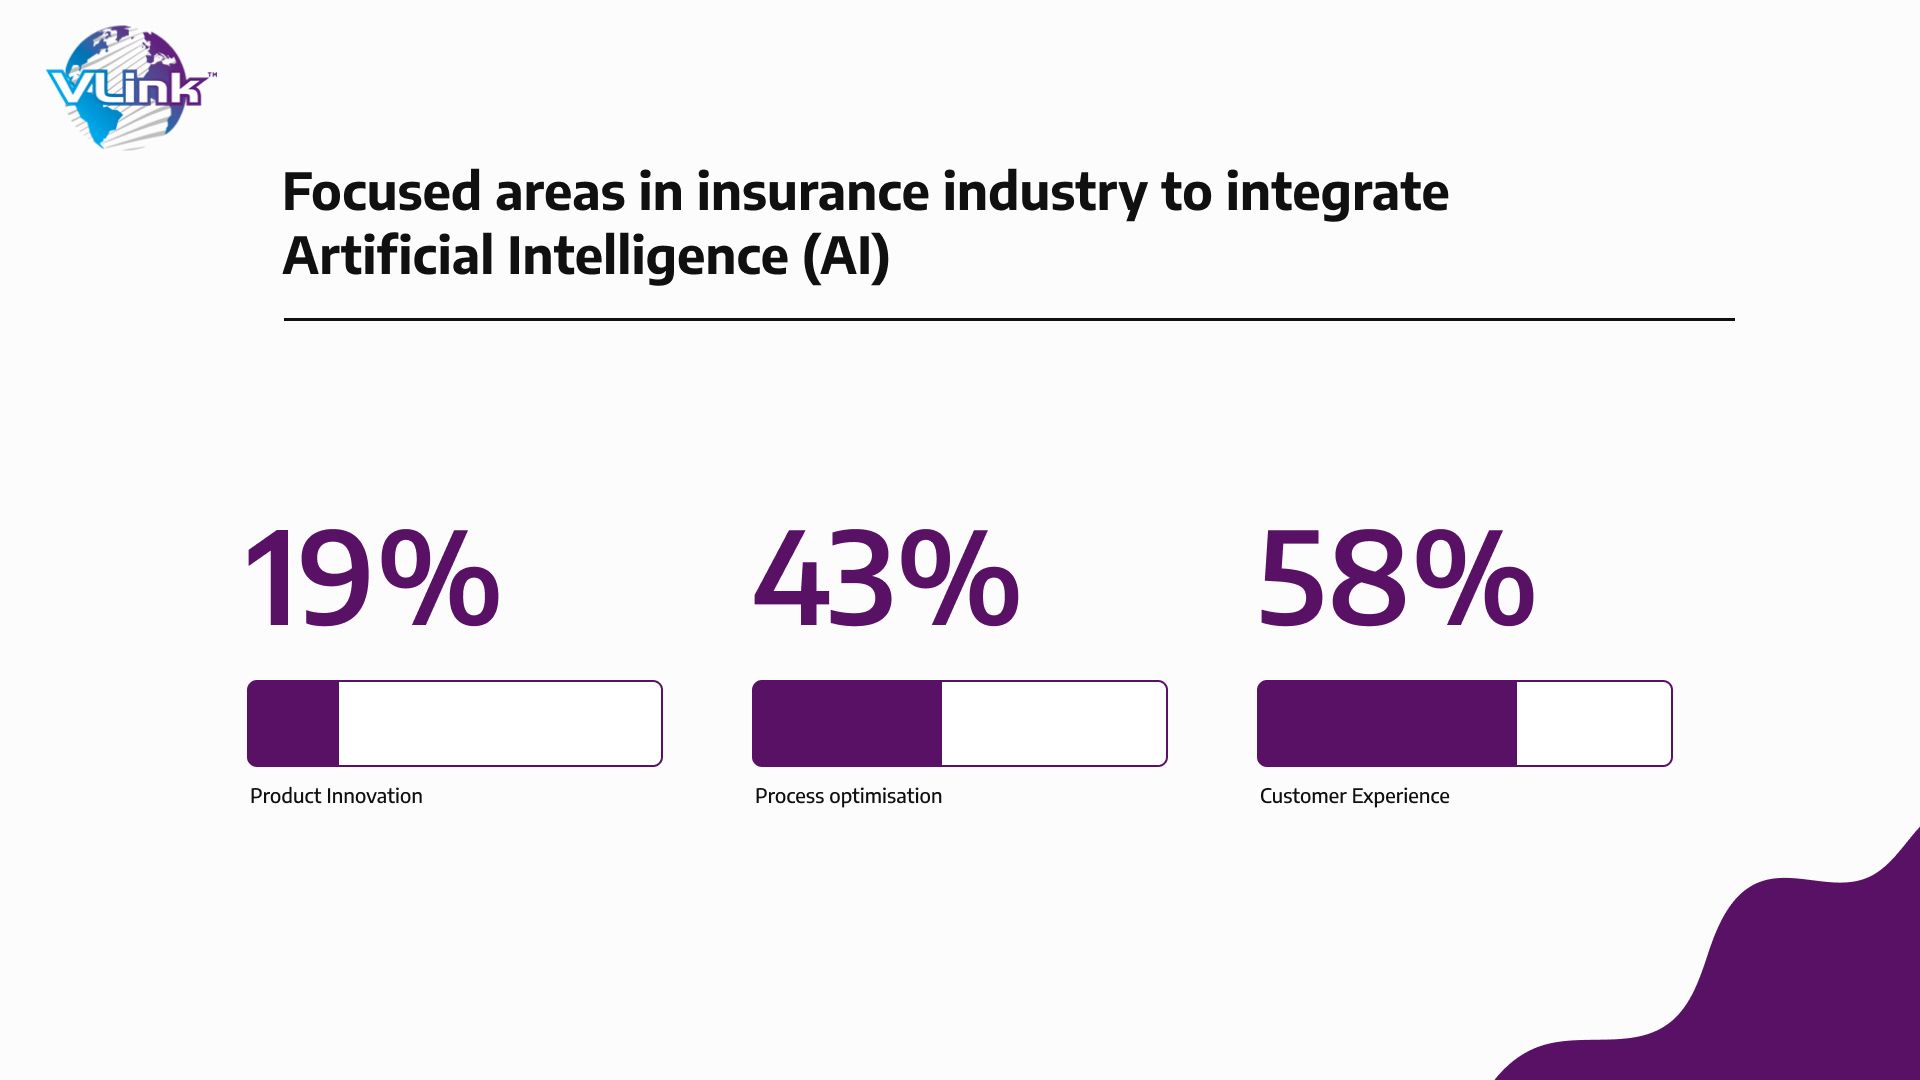 Focused areas in insurance industry to integrate artificial intelligence